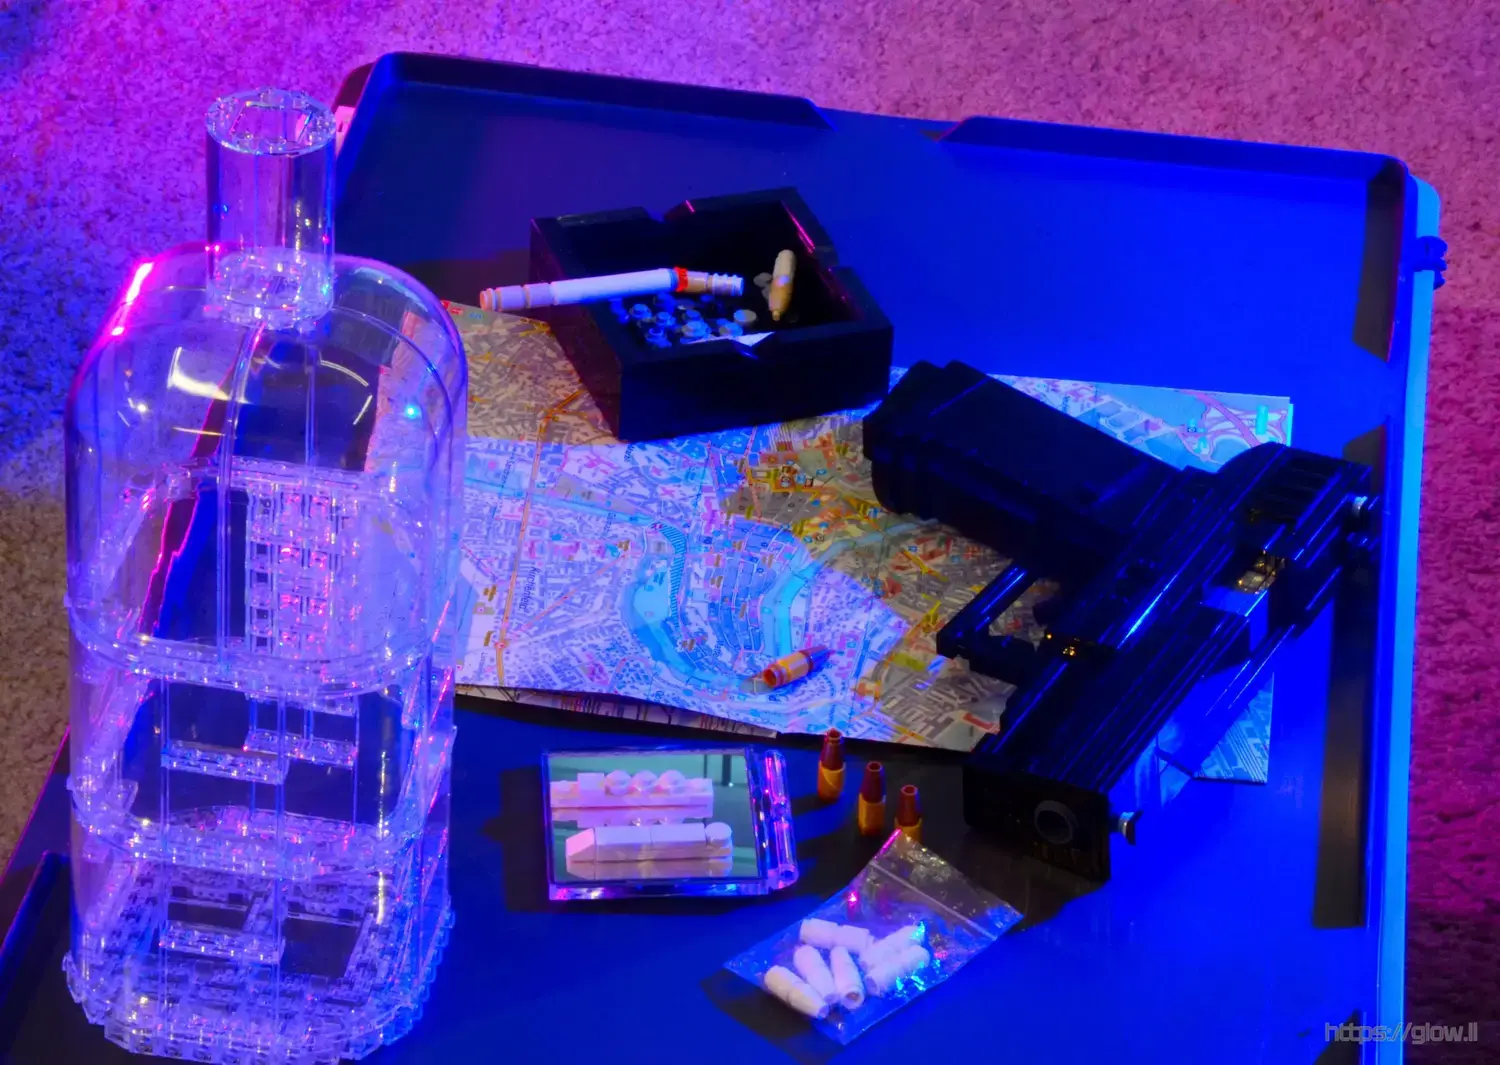 Small Table with a gun, drugs, ashtray and a bottle all made of Lego